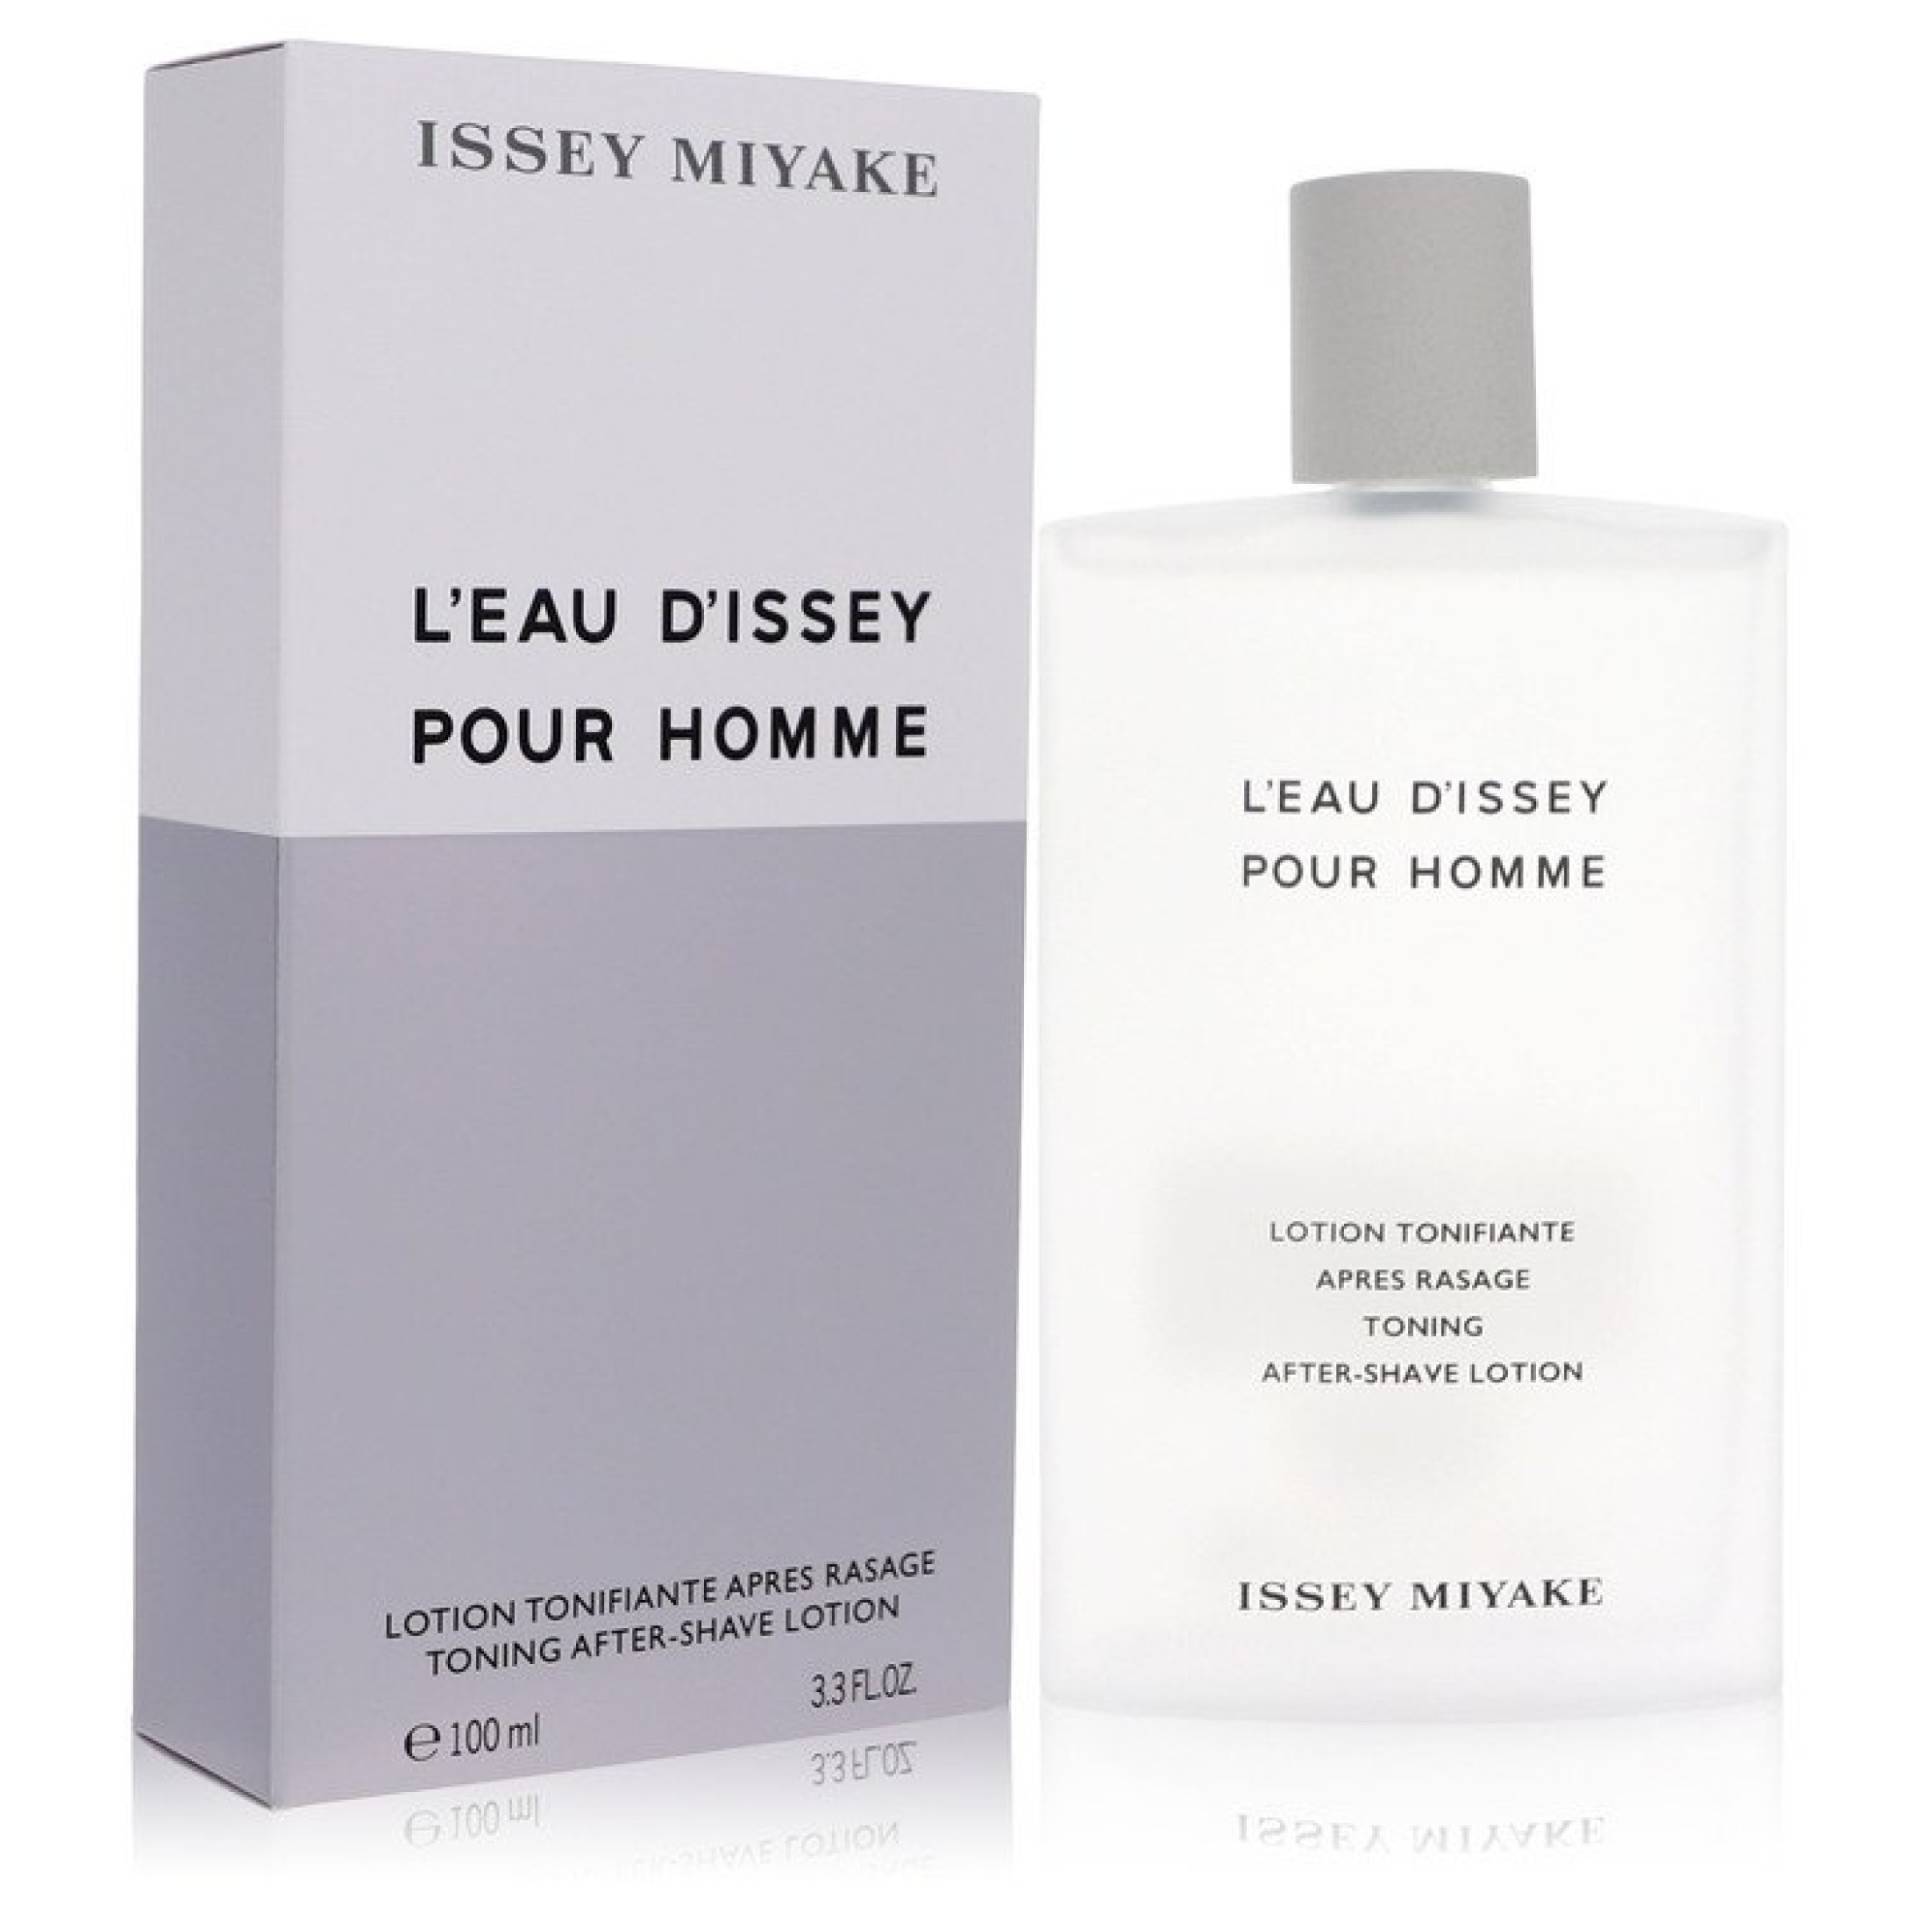 Issey Miyake L'EAU D'ISSEY (issey Miyake) After Shave Toning Lotion 100 ml von Issey Miyake